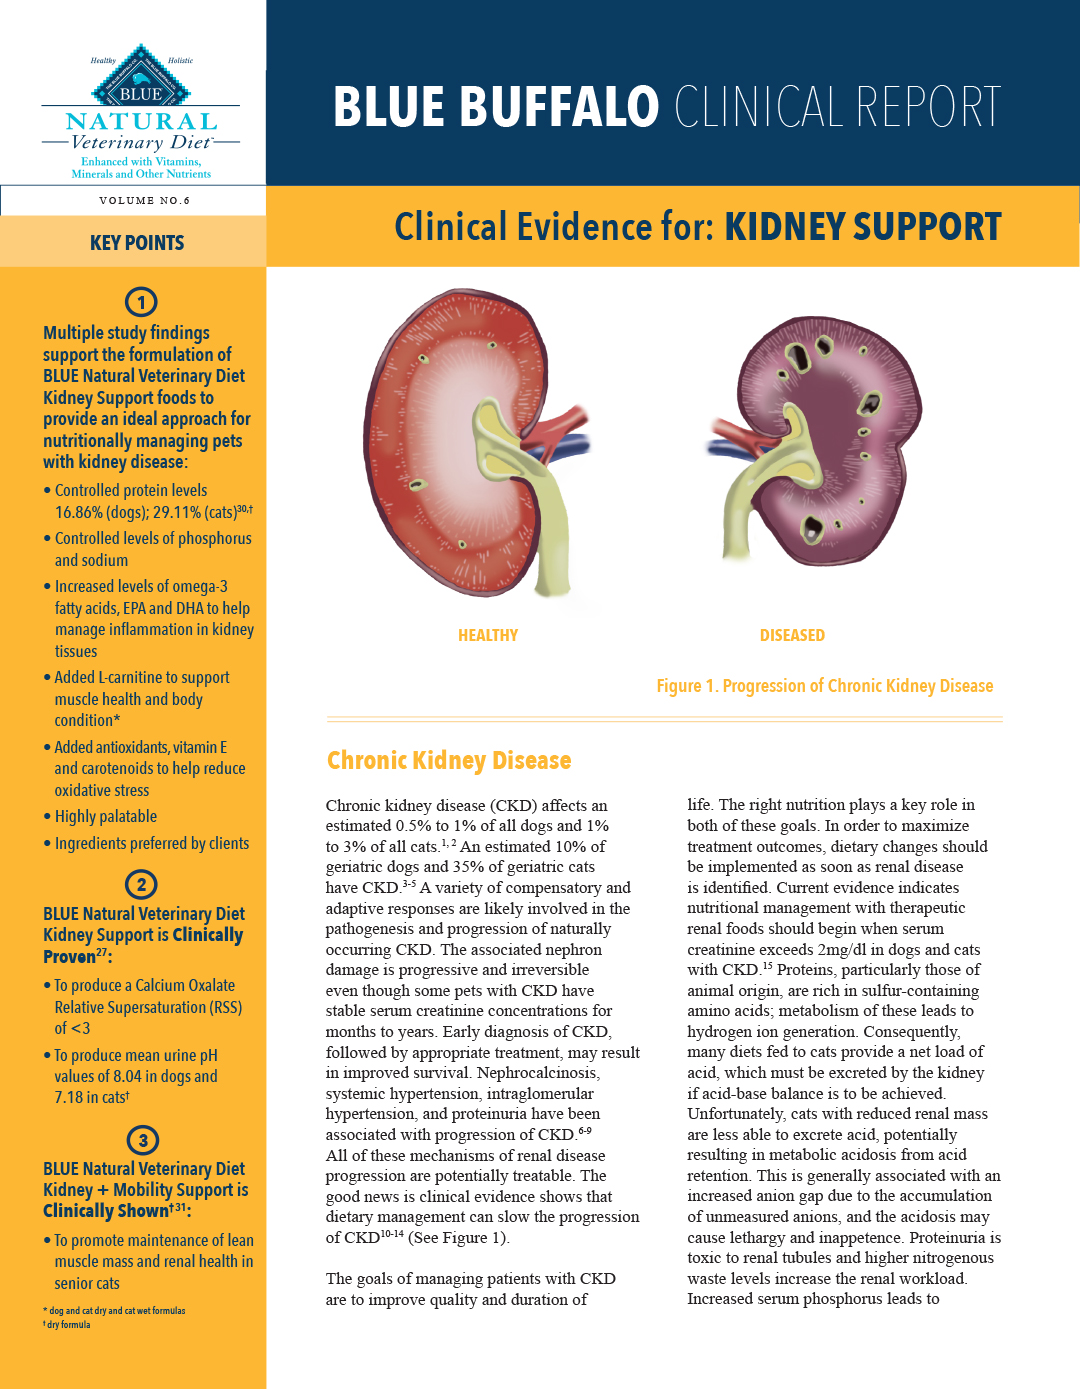 BLUE-NVD-Kidney-Clinical-Report